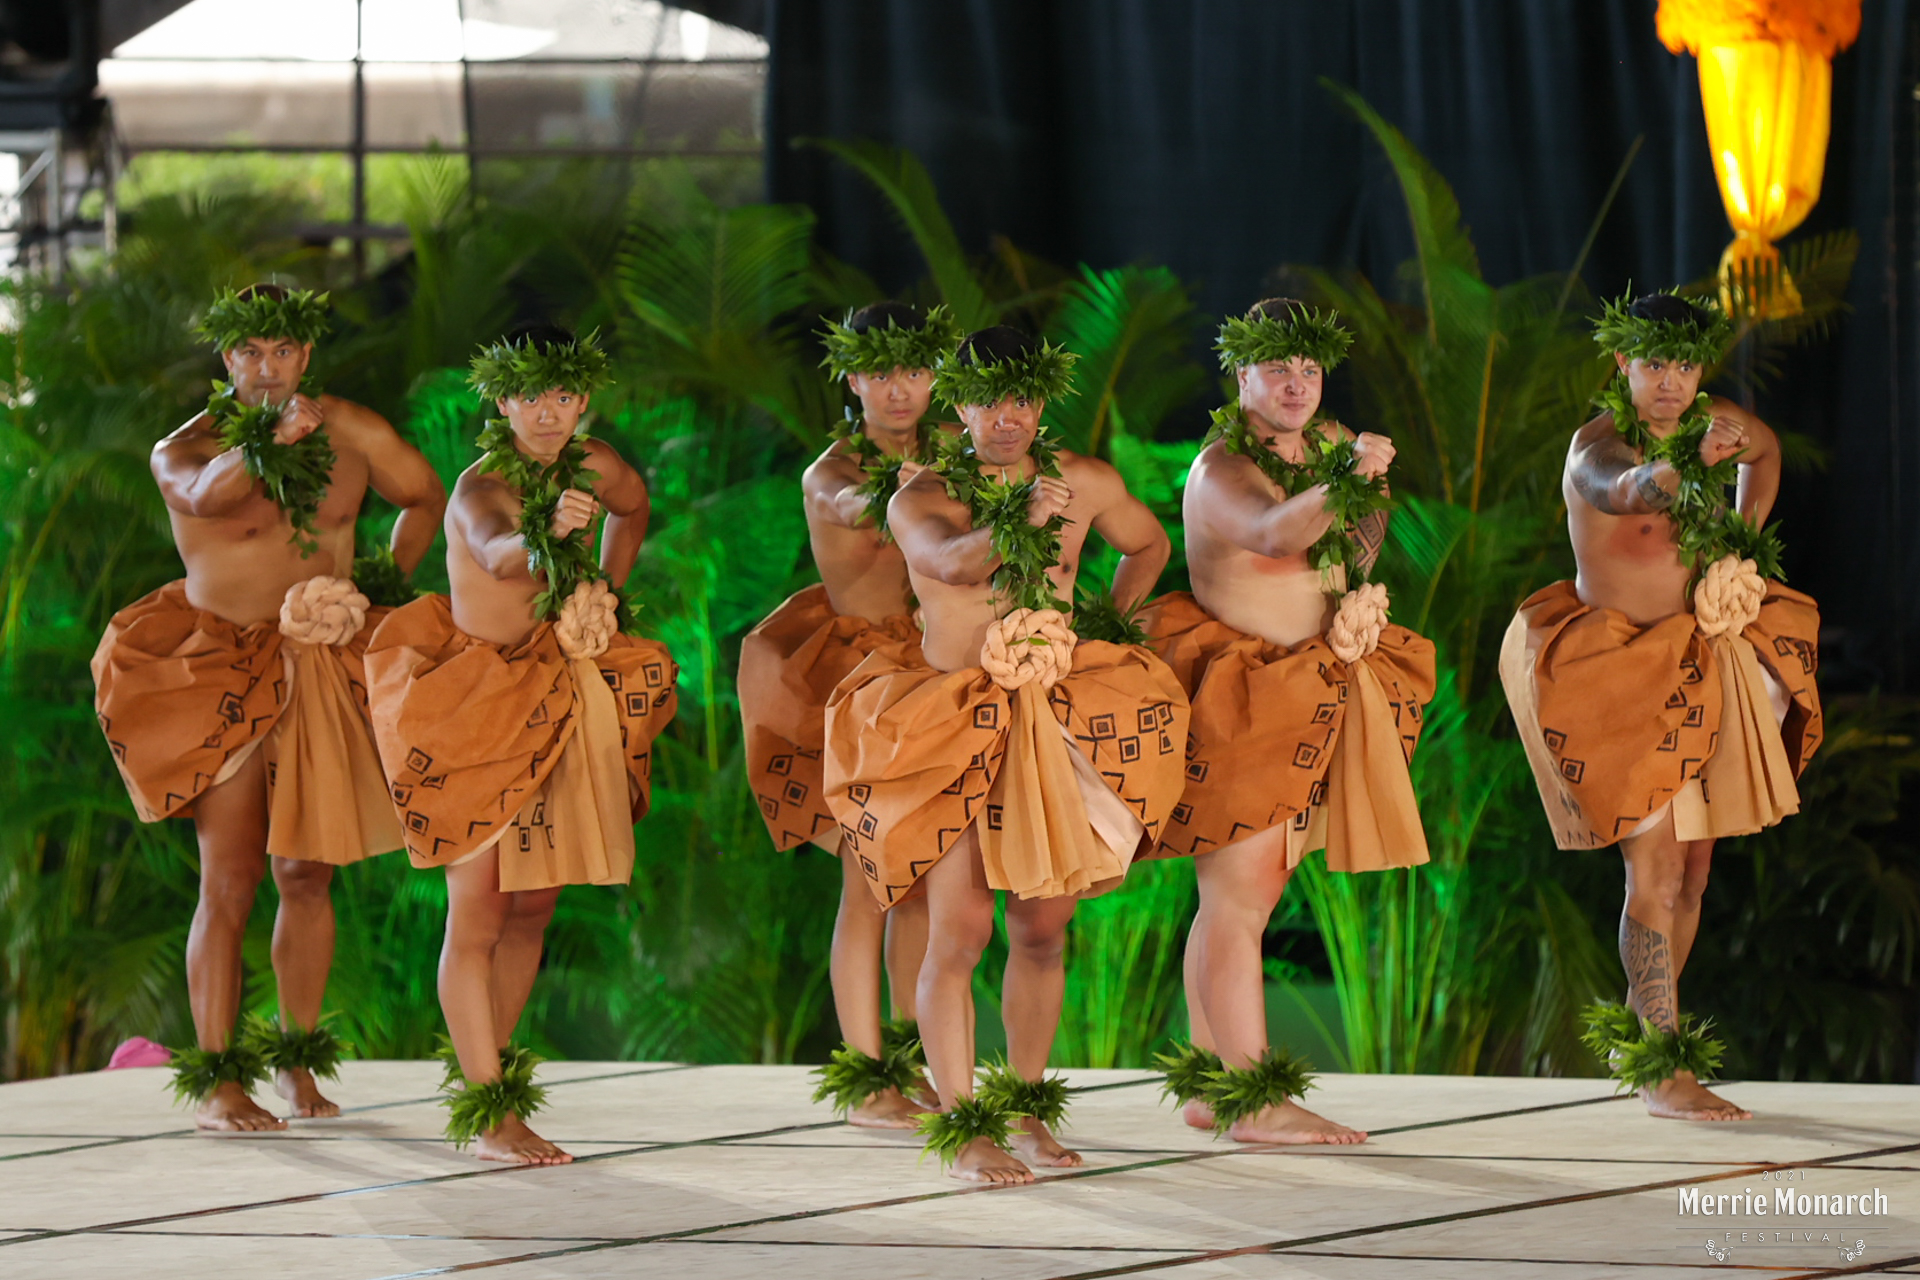 Merrie Monarch 2022 Schedule Organizers: Merrie Monarch Festival To Welcome Back Limited Audience In 2022